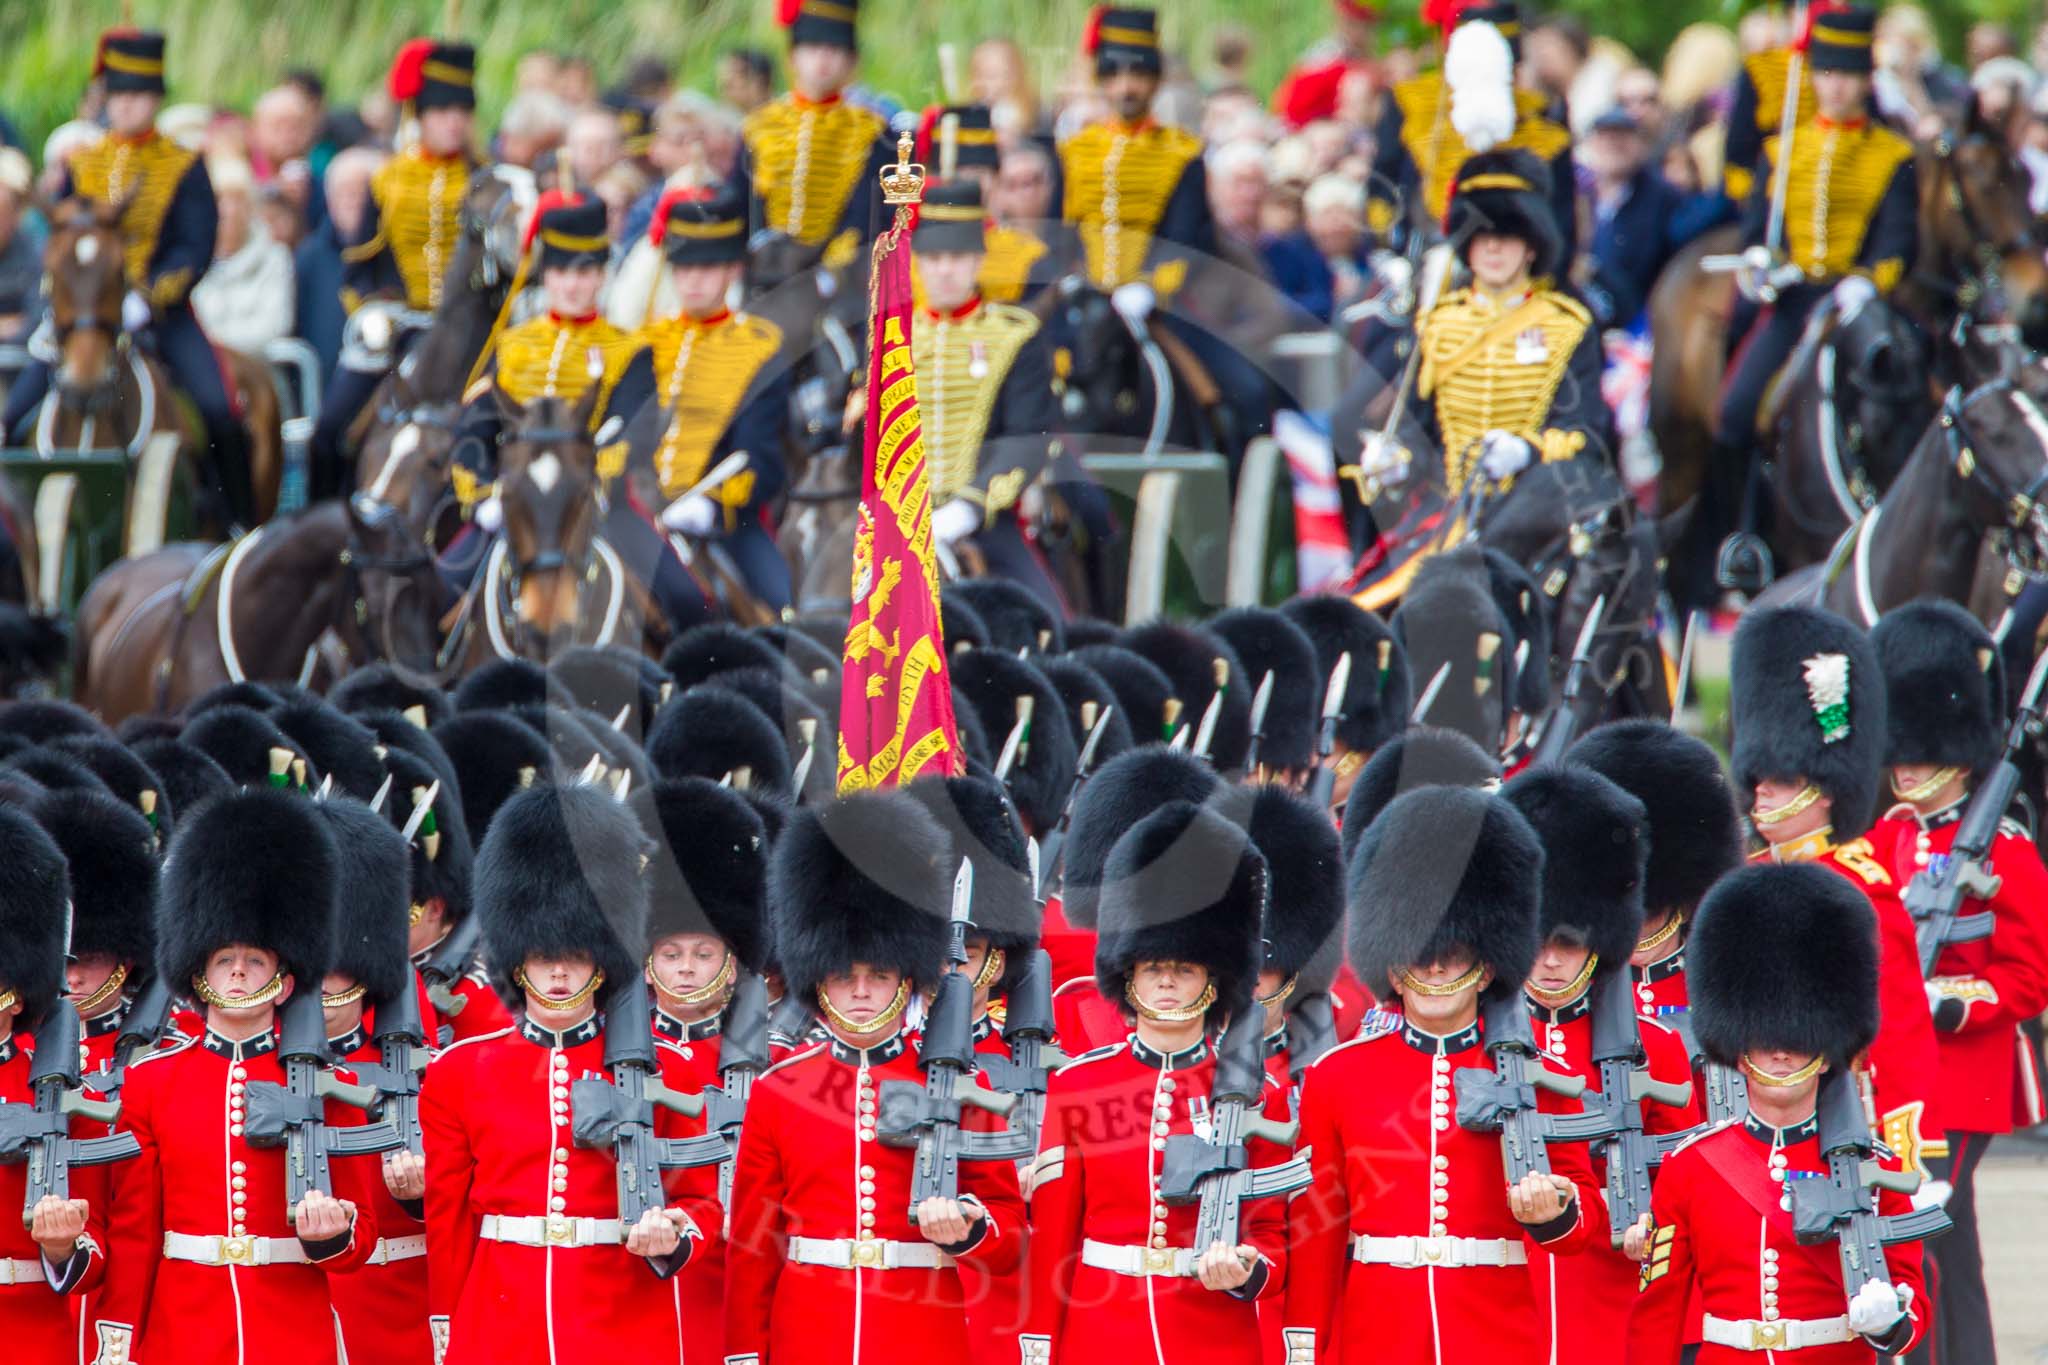 Trooping the Colour 2013: At the end of the March Past in Quick Time, all five guards on the northern side of Horse Guards Parade peform a ninety-degree-turn at the same time. Image #629, 15 June 2013 11:49 Horse Guards Parade, London, UK